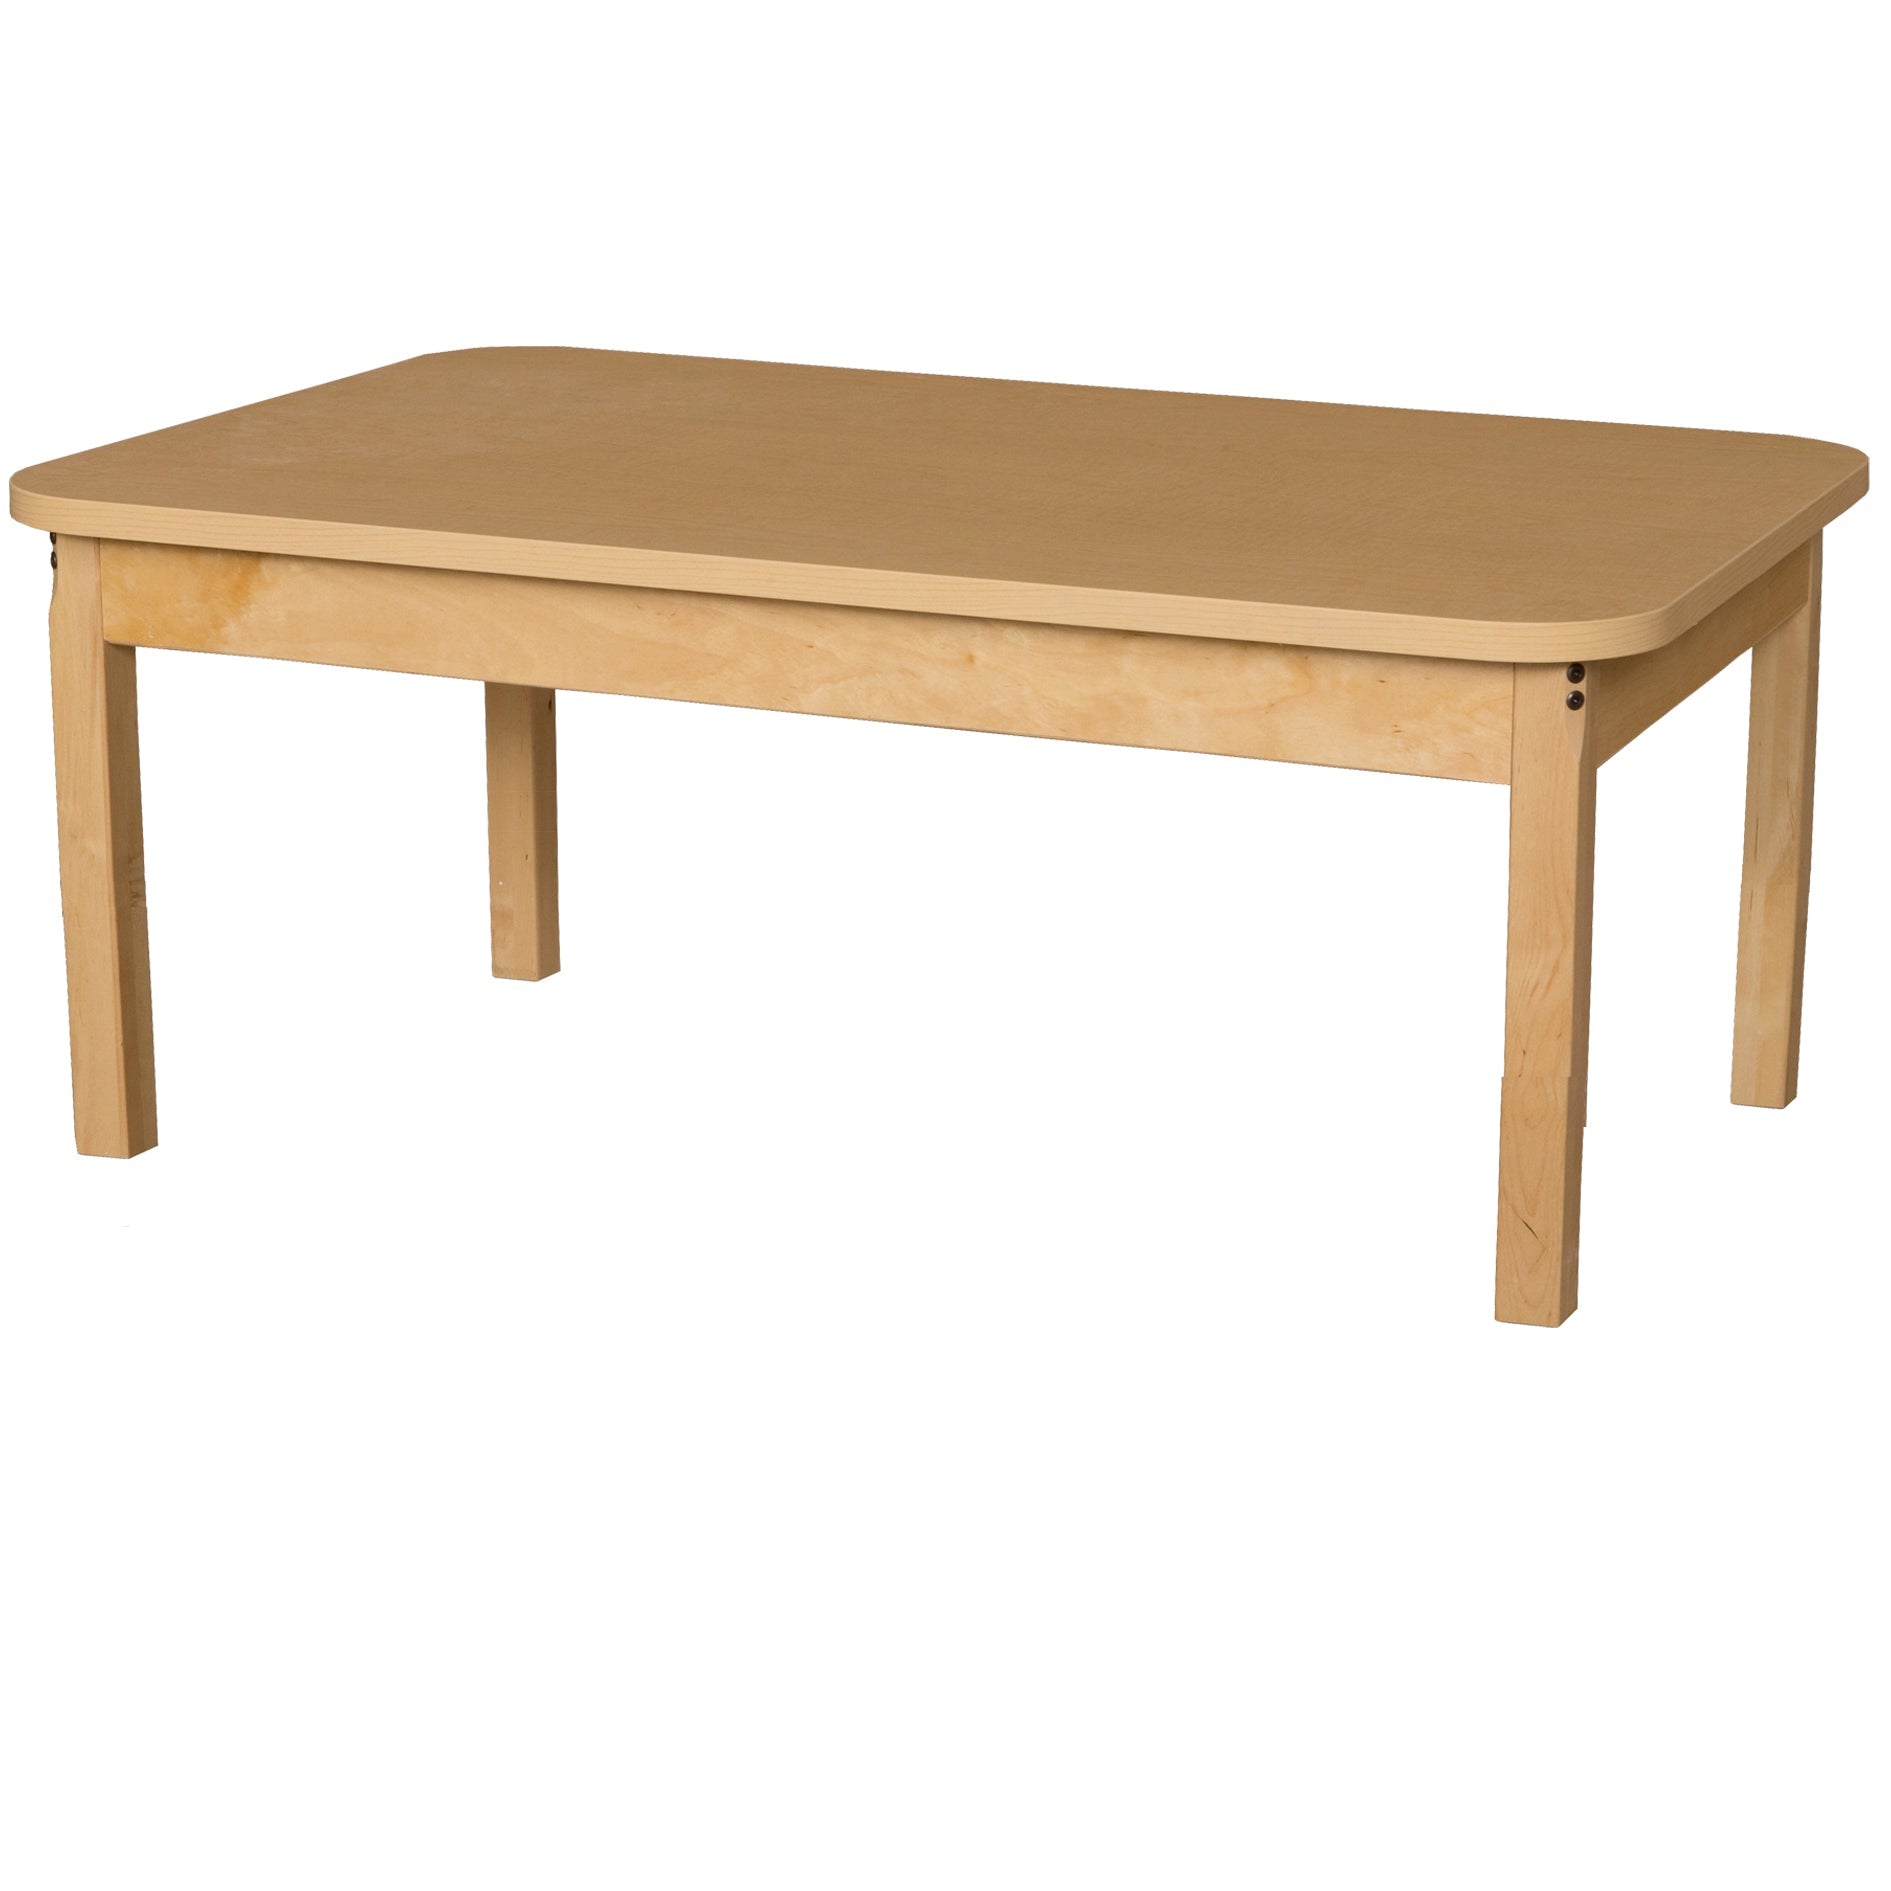 Wood Designs 30" x 48" Rectangle High Pressure Laminate Table with Hardwood Legs-14" - (HPL304814) - SchoolOutlet